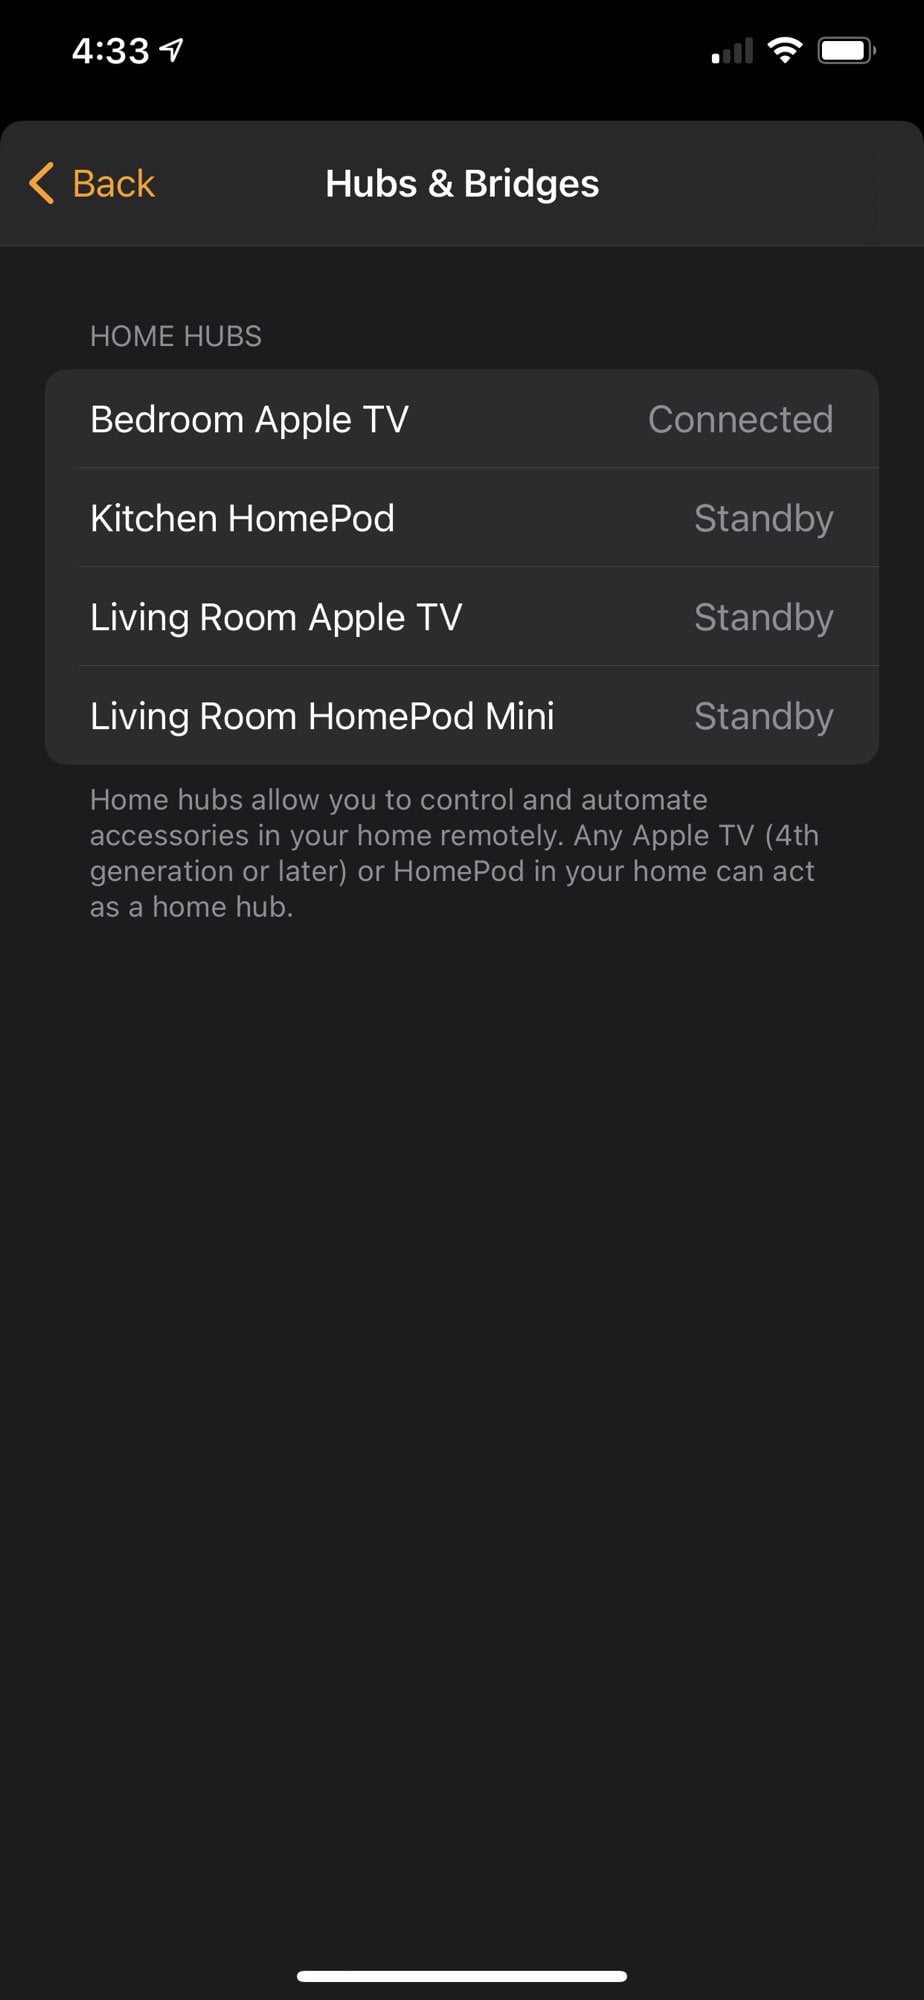 Does the HomePod mini need to be the connected hub